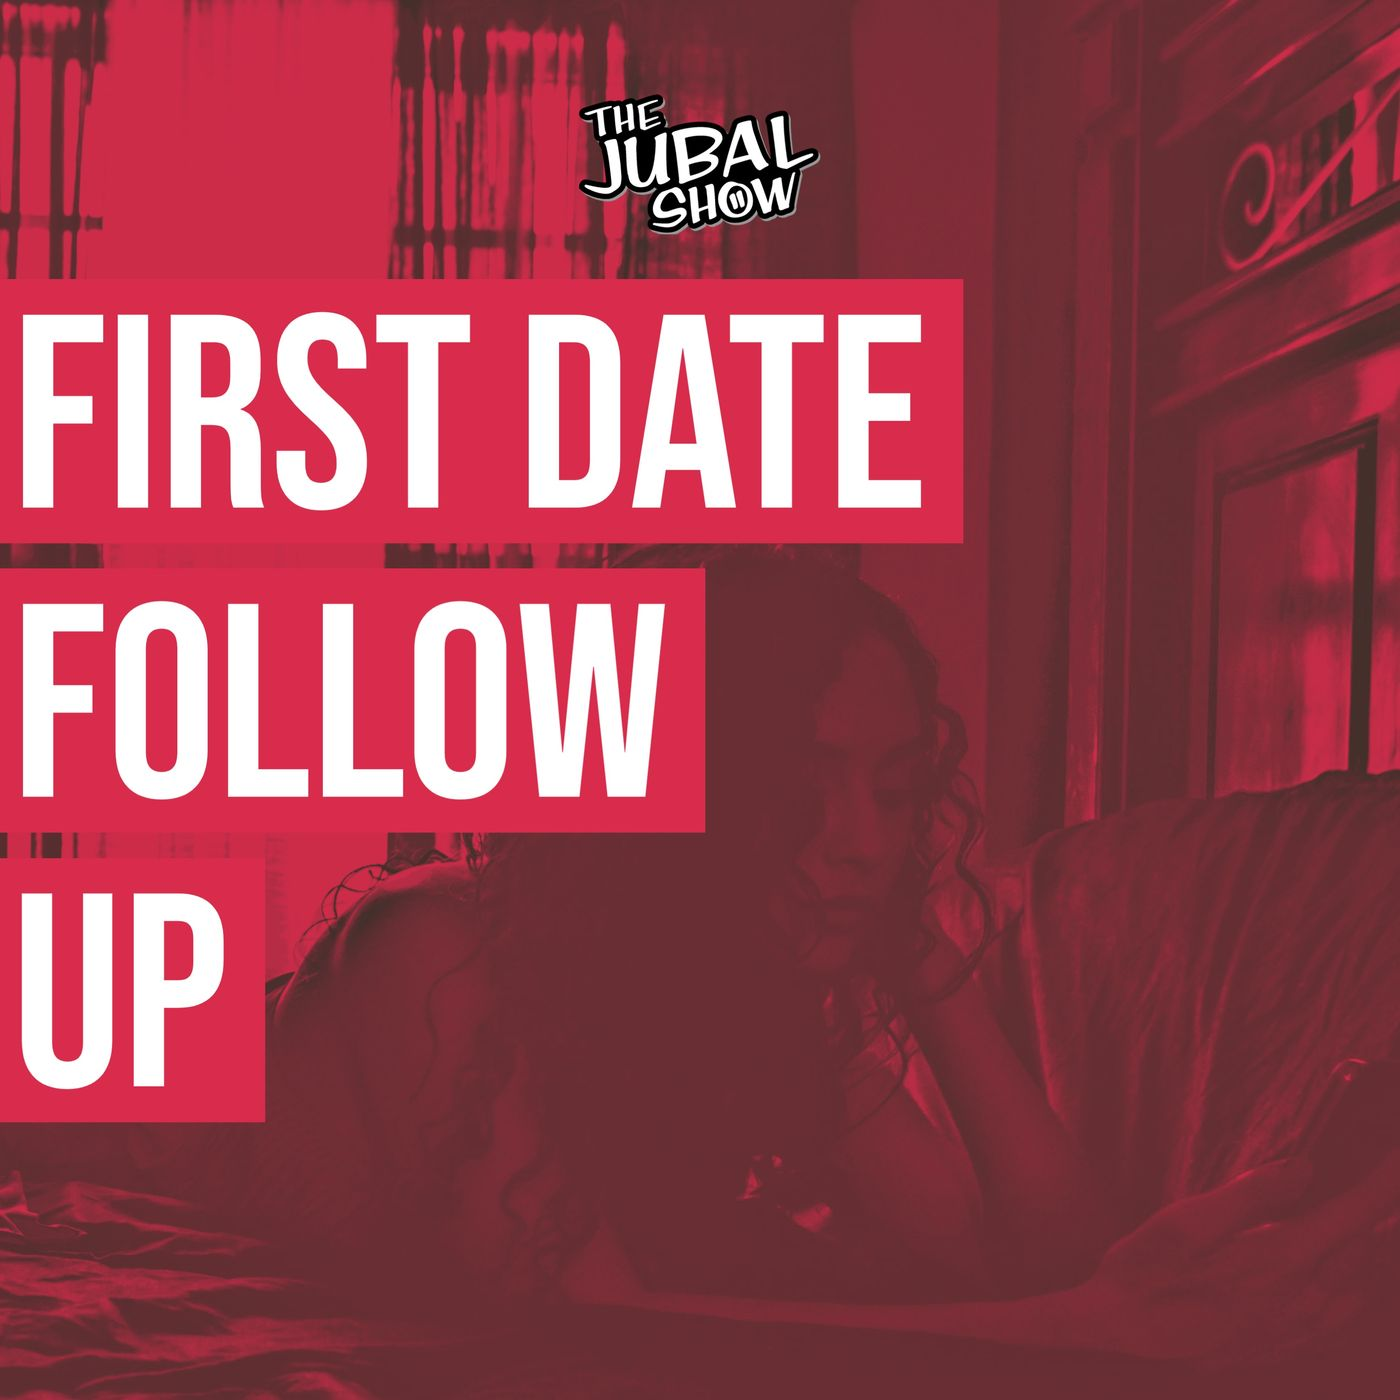 This First Date Follow Up hits the chopping block!